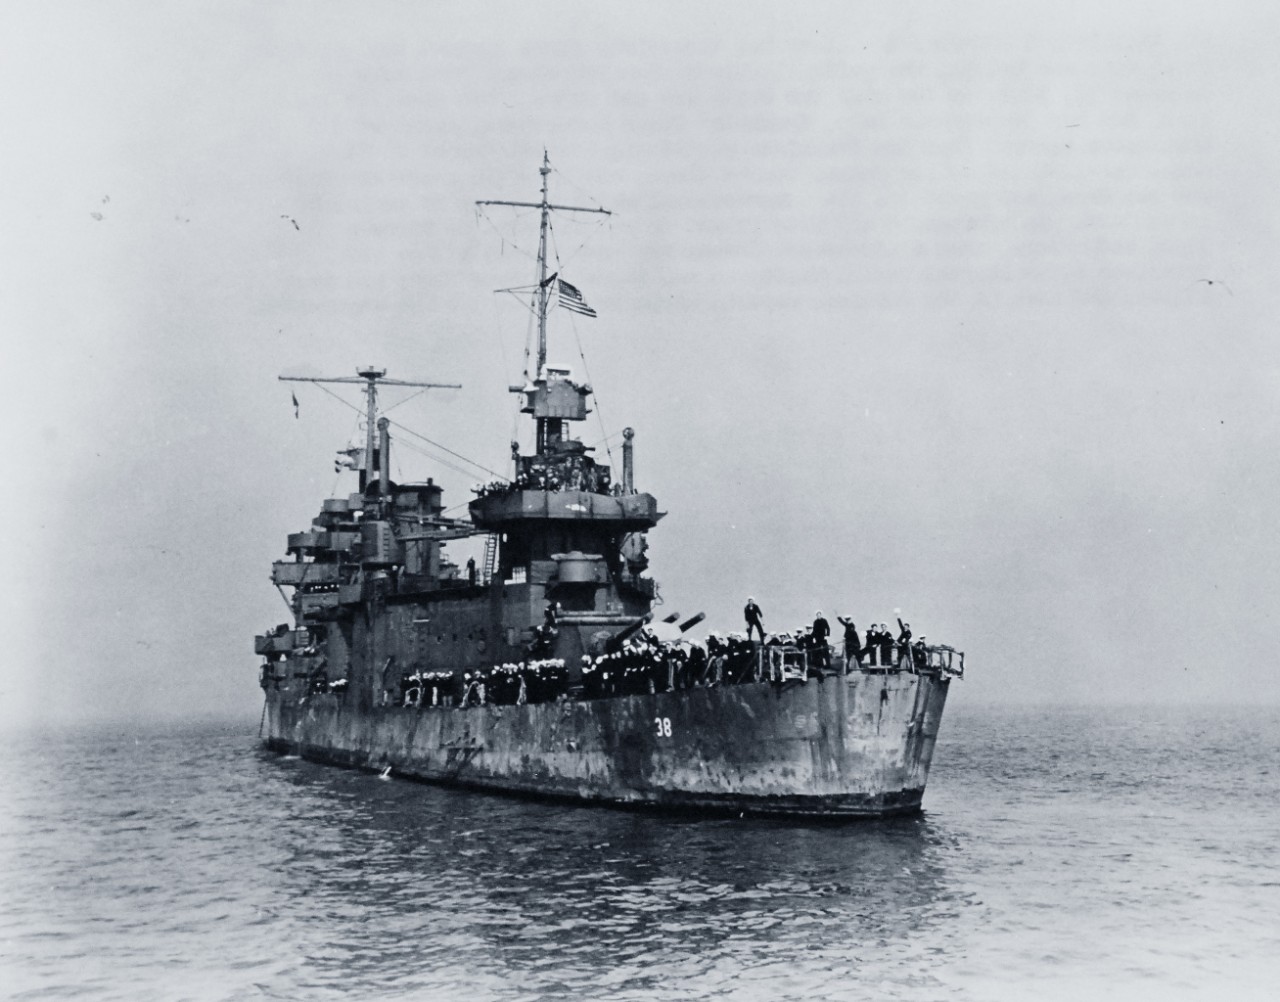 80-G-40250:   USS San Francisco (CA 38) shown after her fight against the Japanese in the epic sea battle, Naval Battle of Guadalcanal, November 12-15, 1942.  She arrived in her namesake city for repairs on December 12, 1942.  She was en route to the Mare Island Navy Yard.  Official U.S. Navy Photograph, now in the collections of the National Archives.   (2015/10/20).